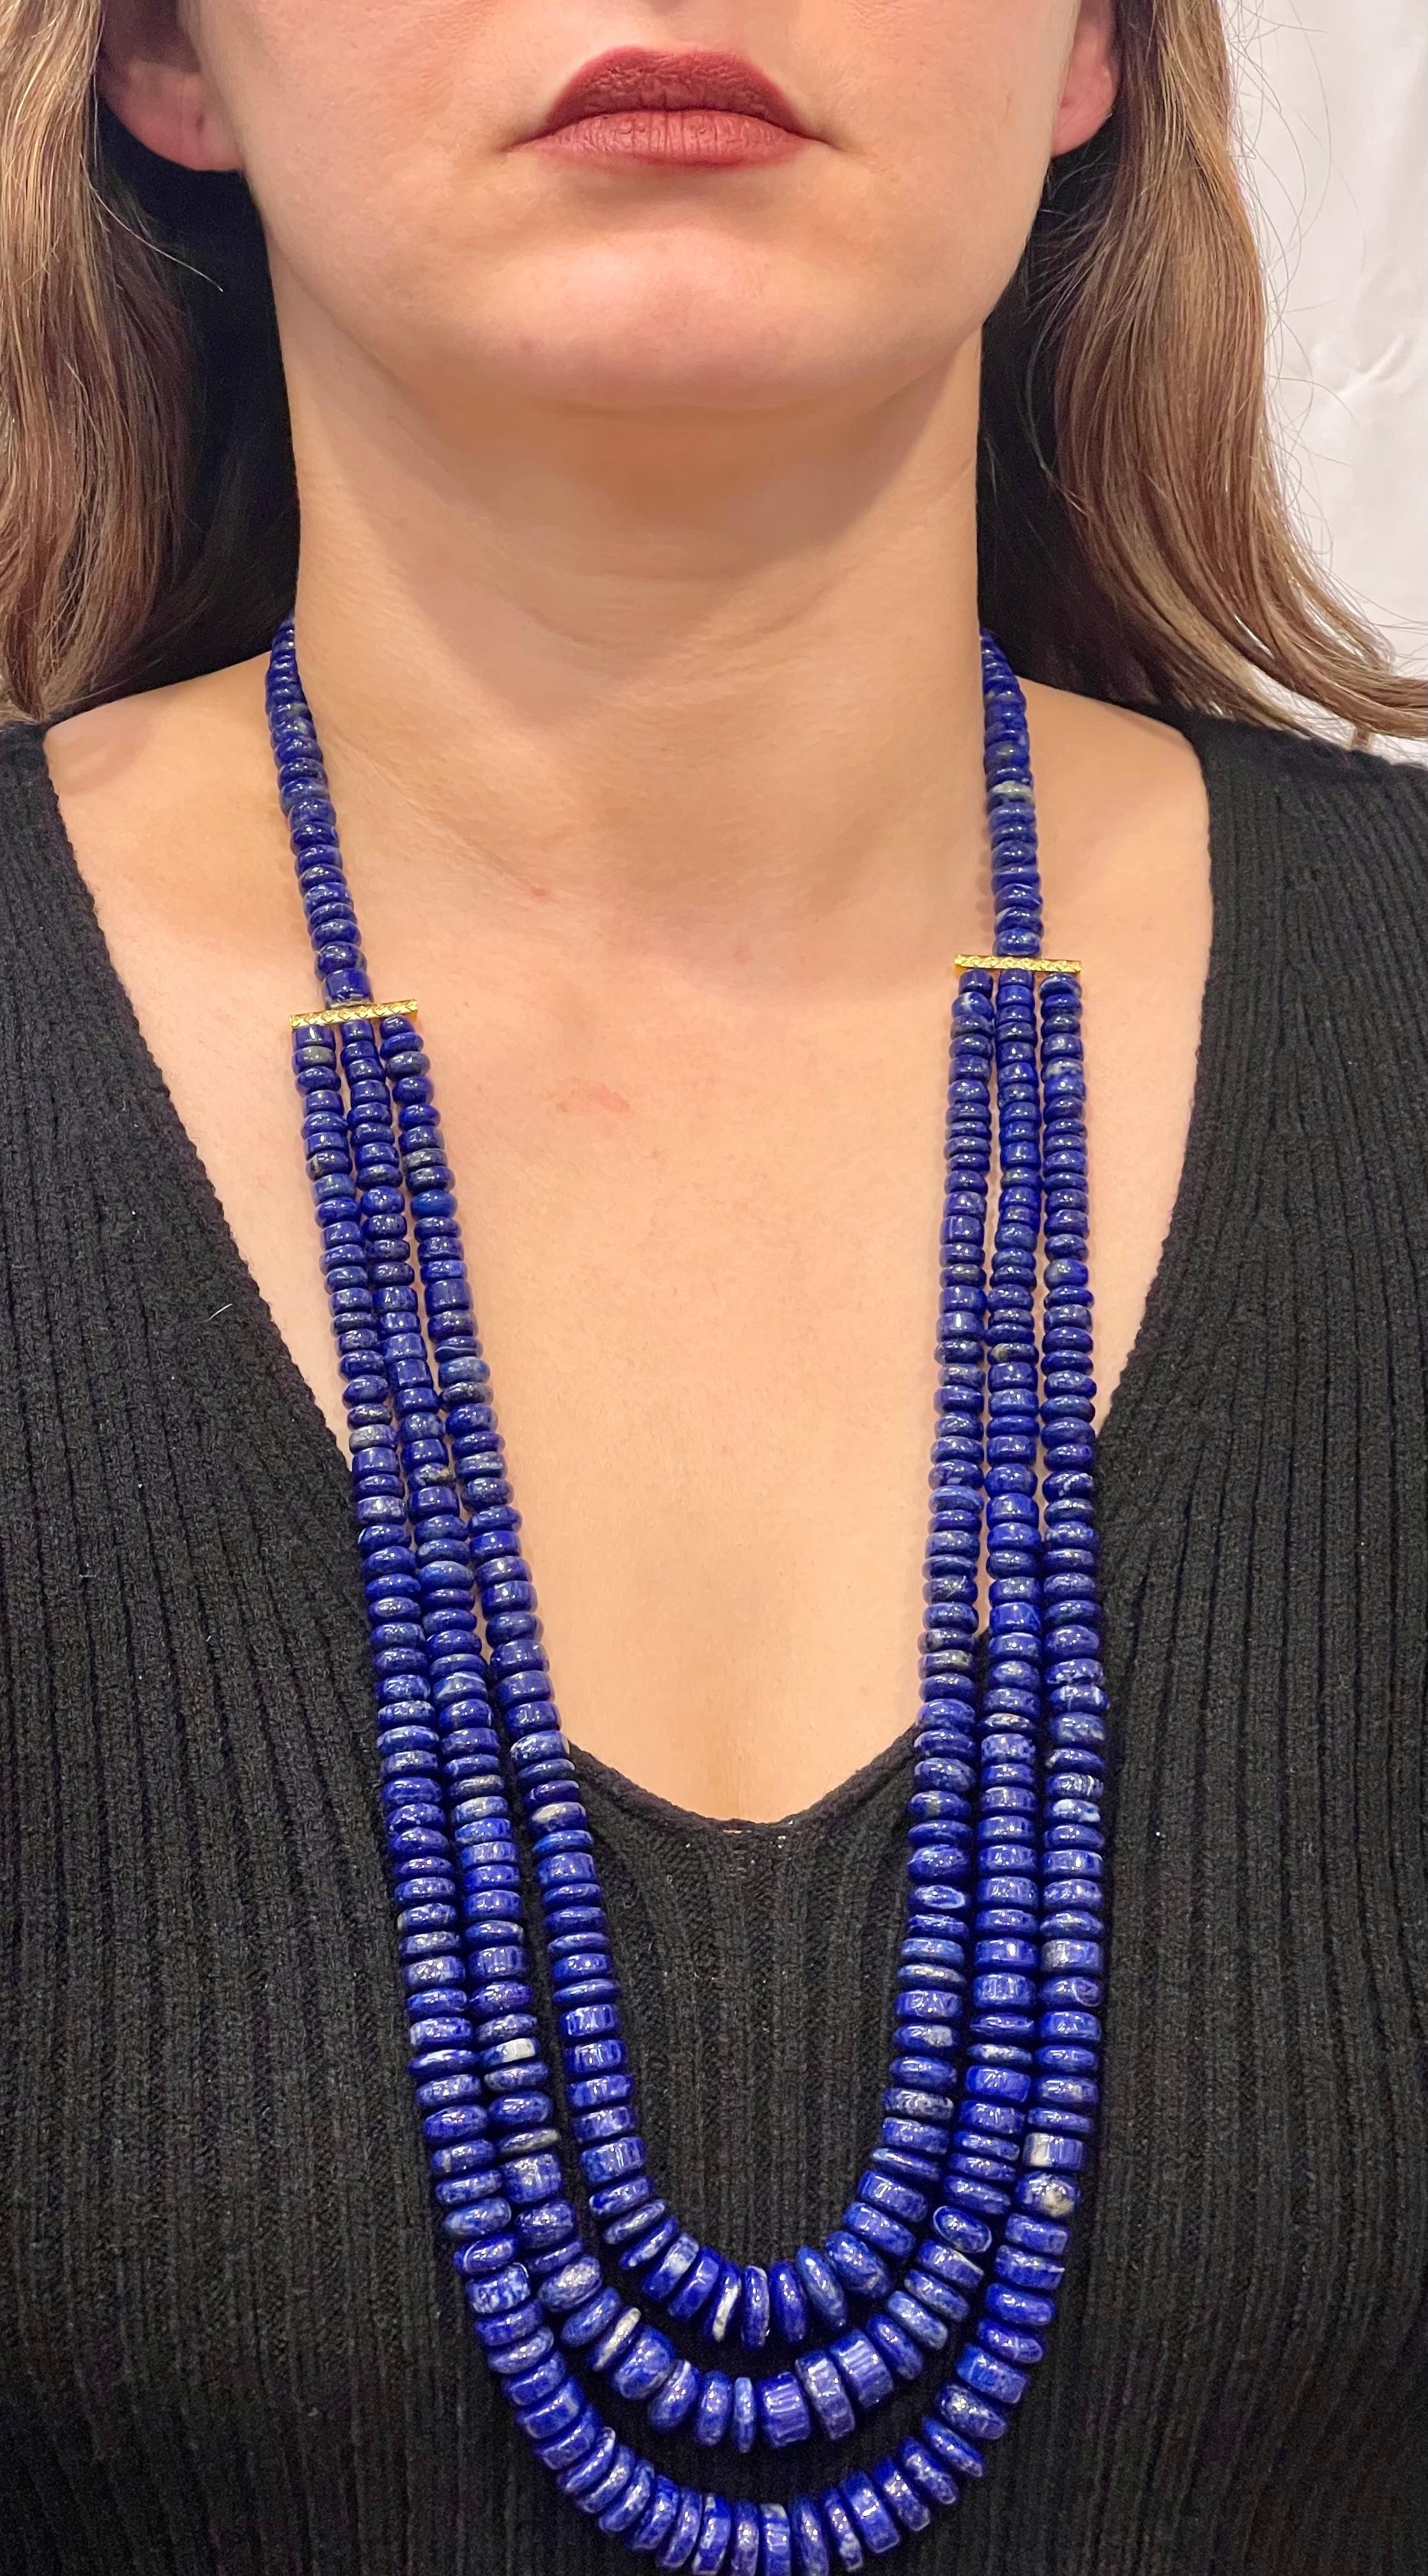  Vintage Lapis Lazuli Multi Strand Necklace 14 Kt Yellow Gold , Three graduating rows
This marvelous vintage Lapis Lazuli Multi strand  beads  necklace features multiple row of luscious  Beads
No clasp as its big enough to go thru over the